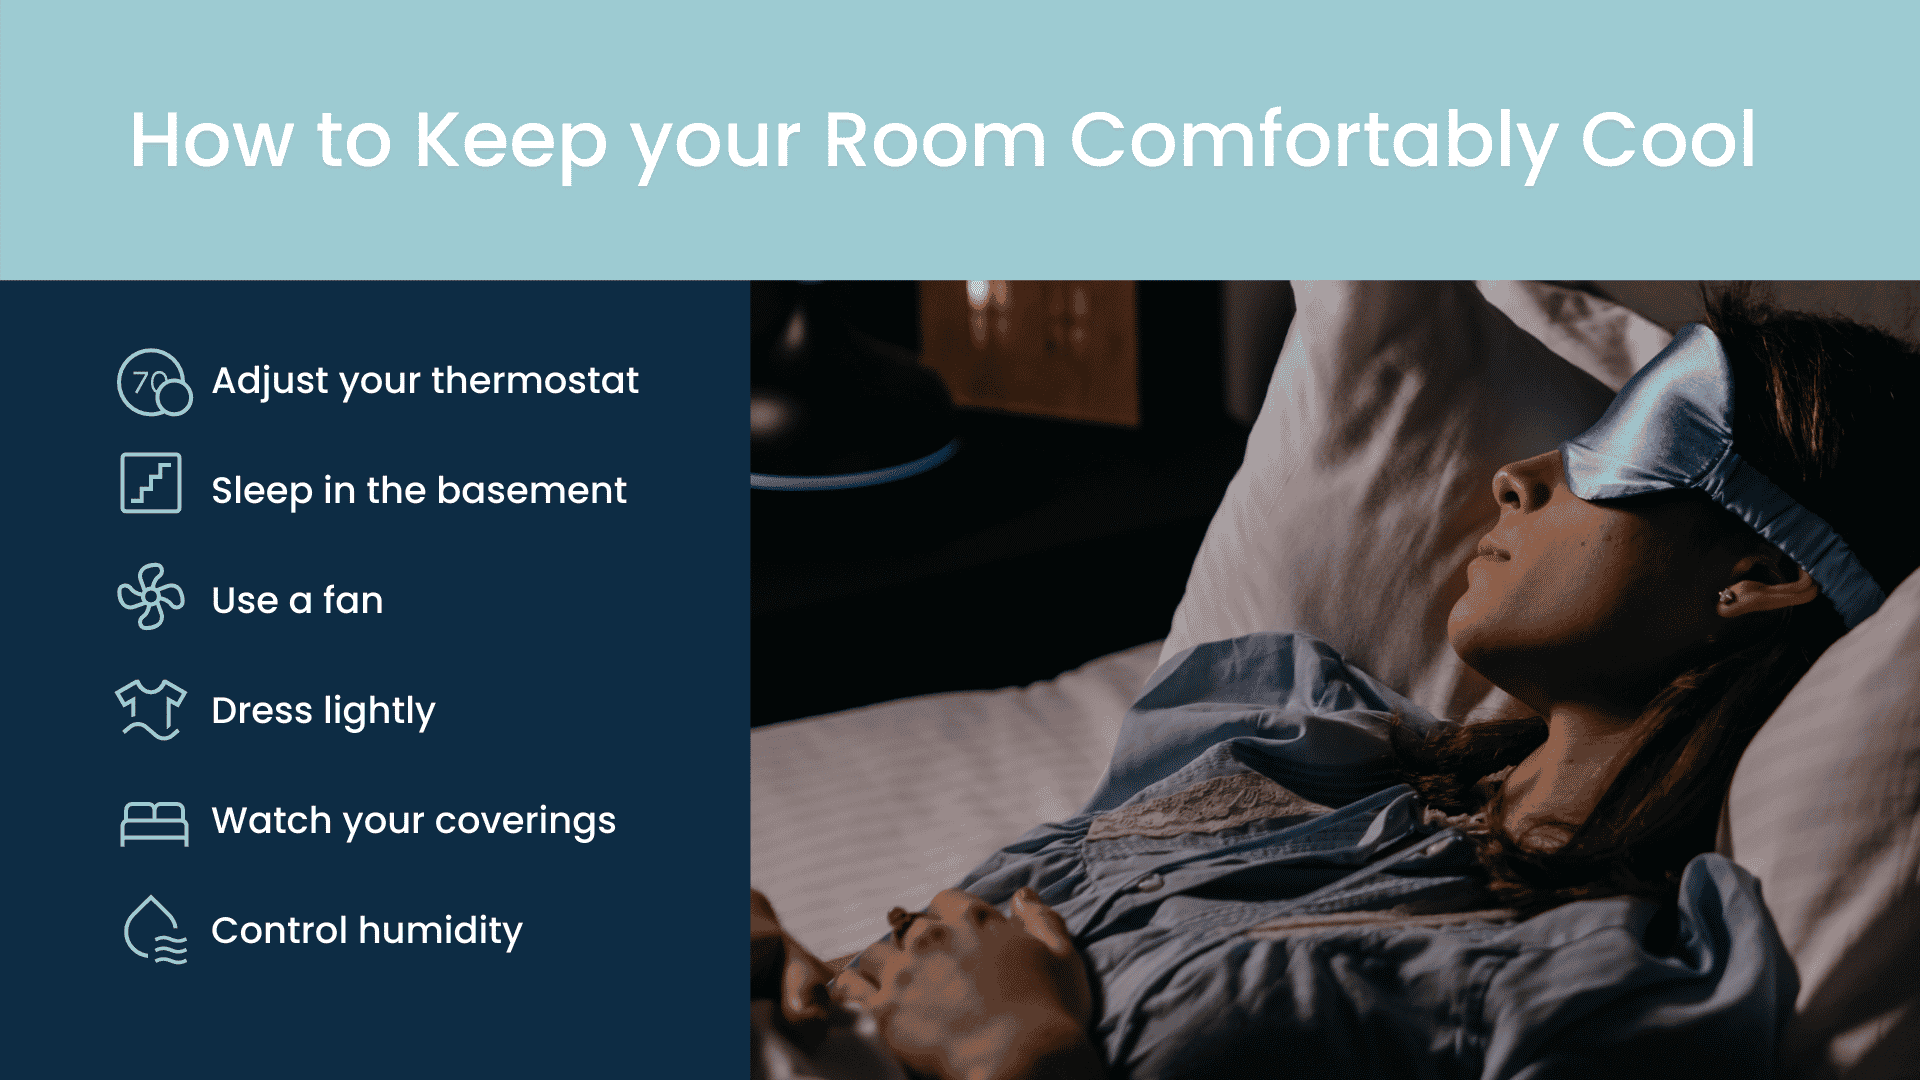 How to keep your room comfortably cool list.